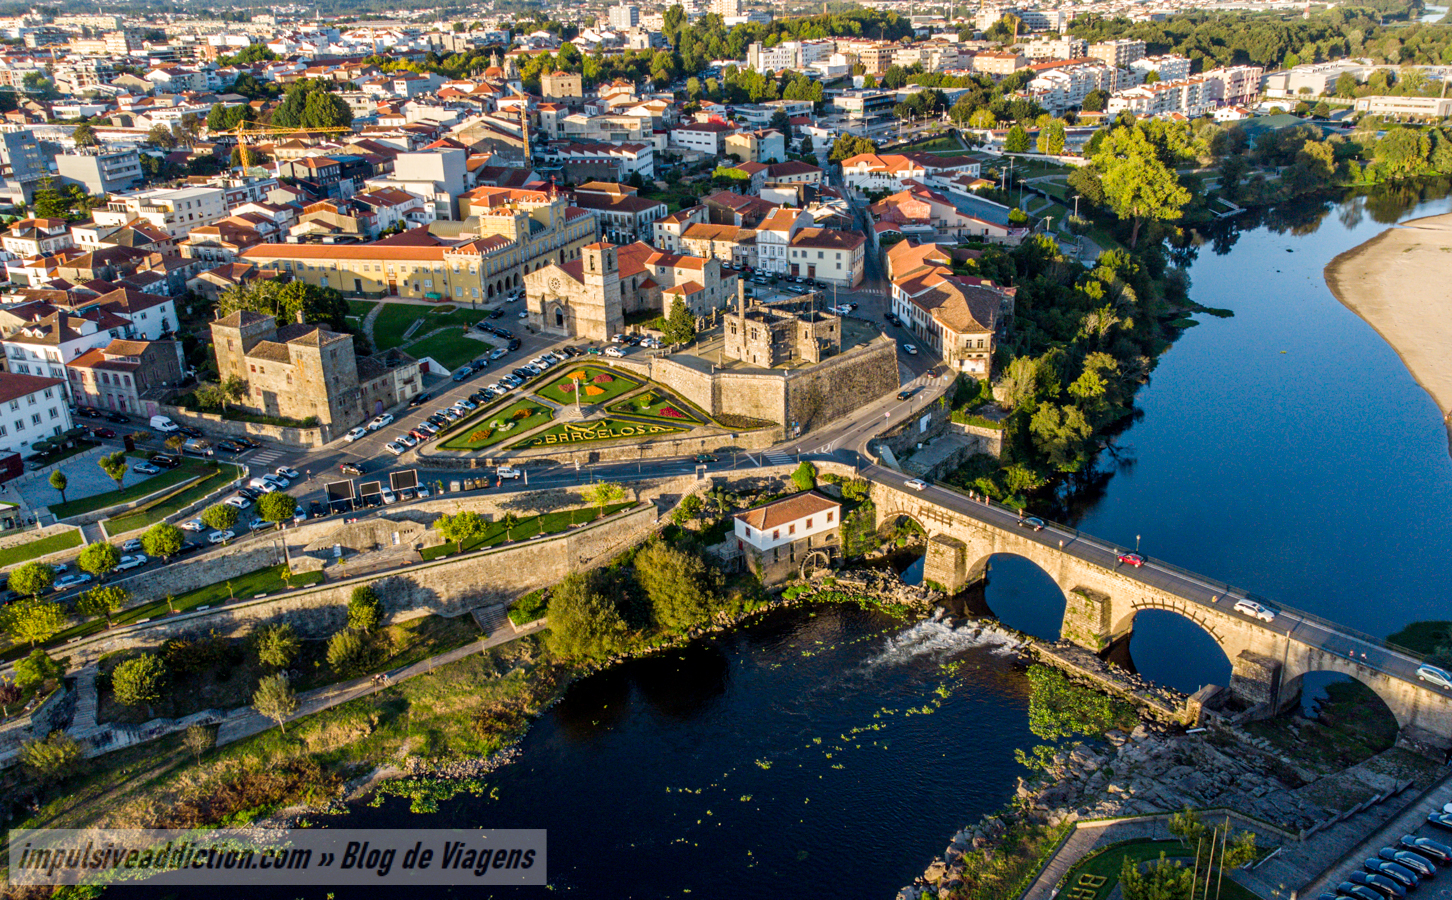 City of Barcelos as a day trip from Porto